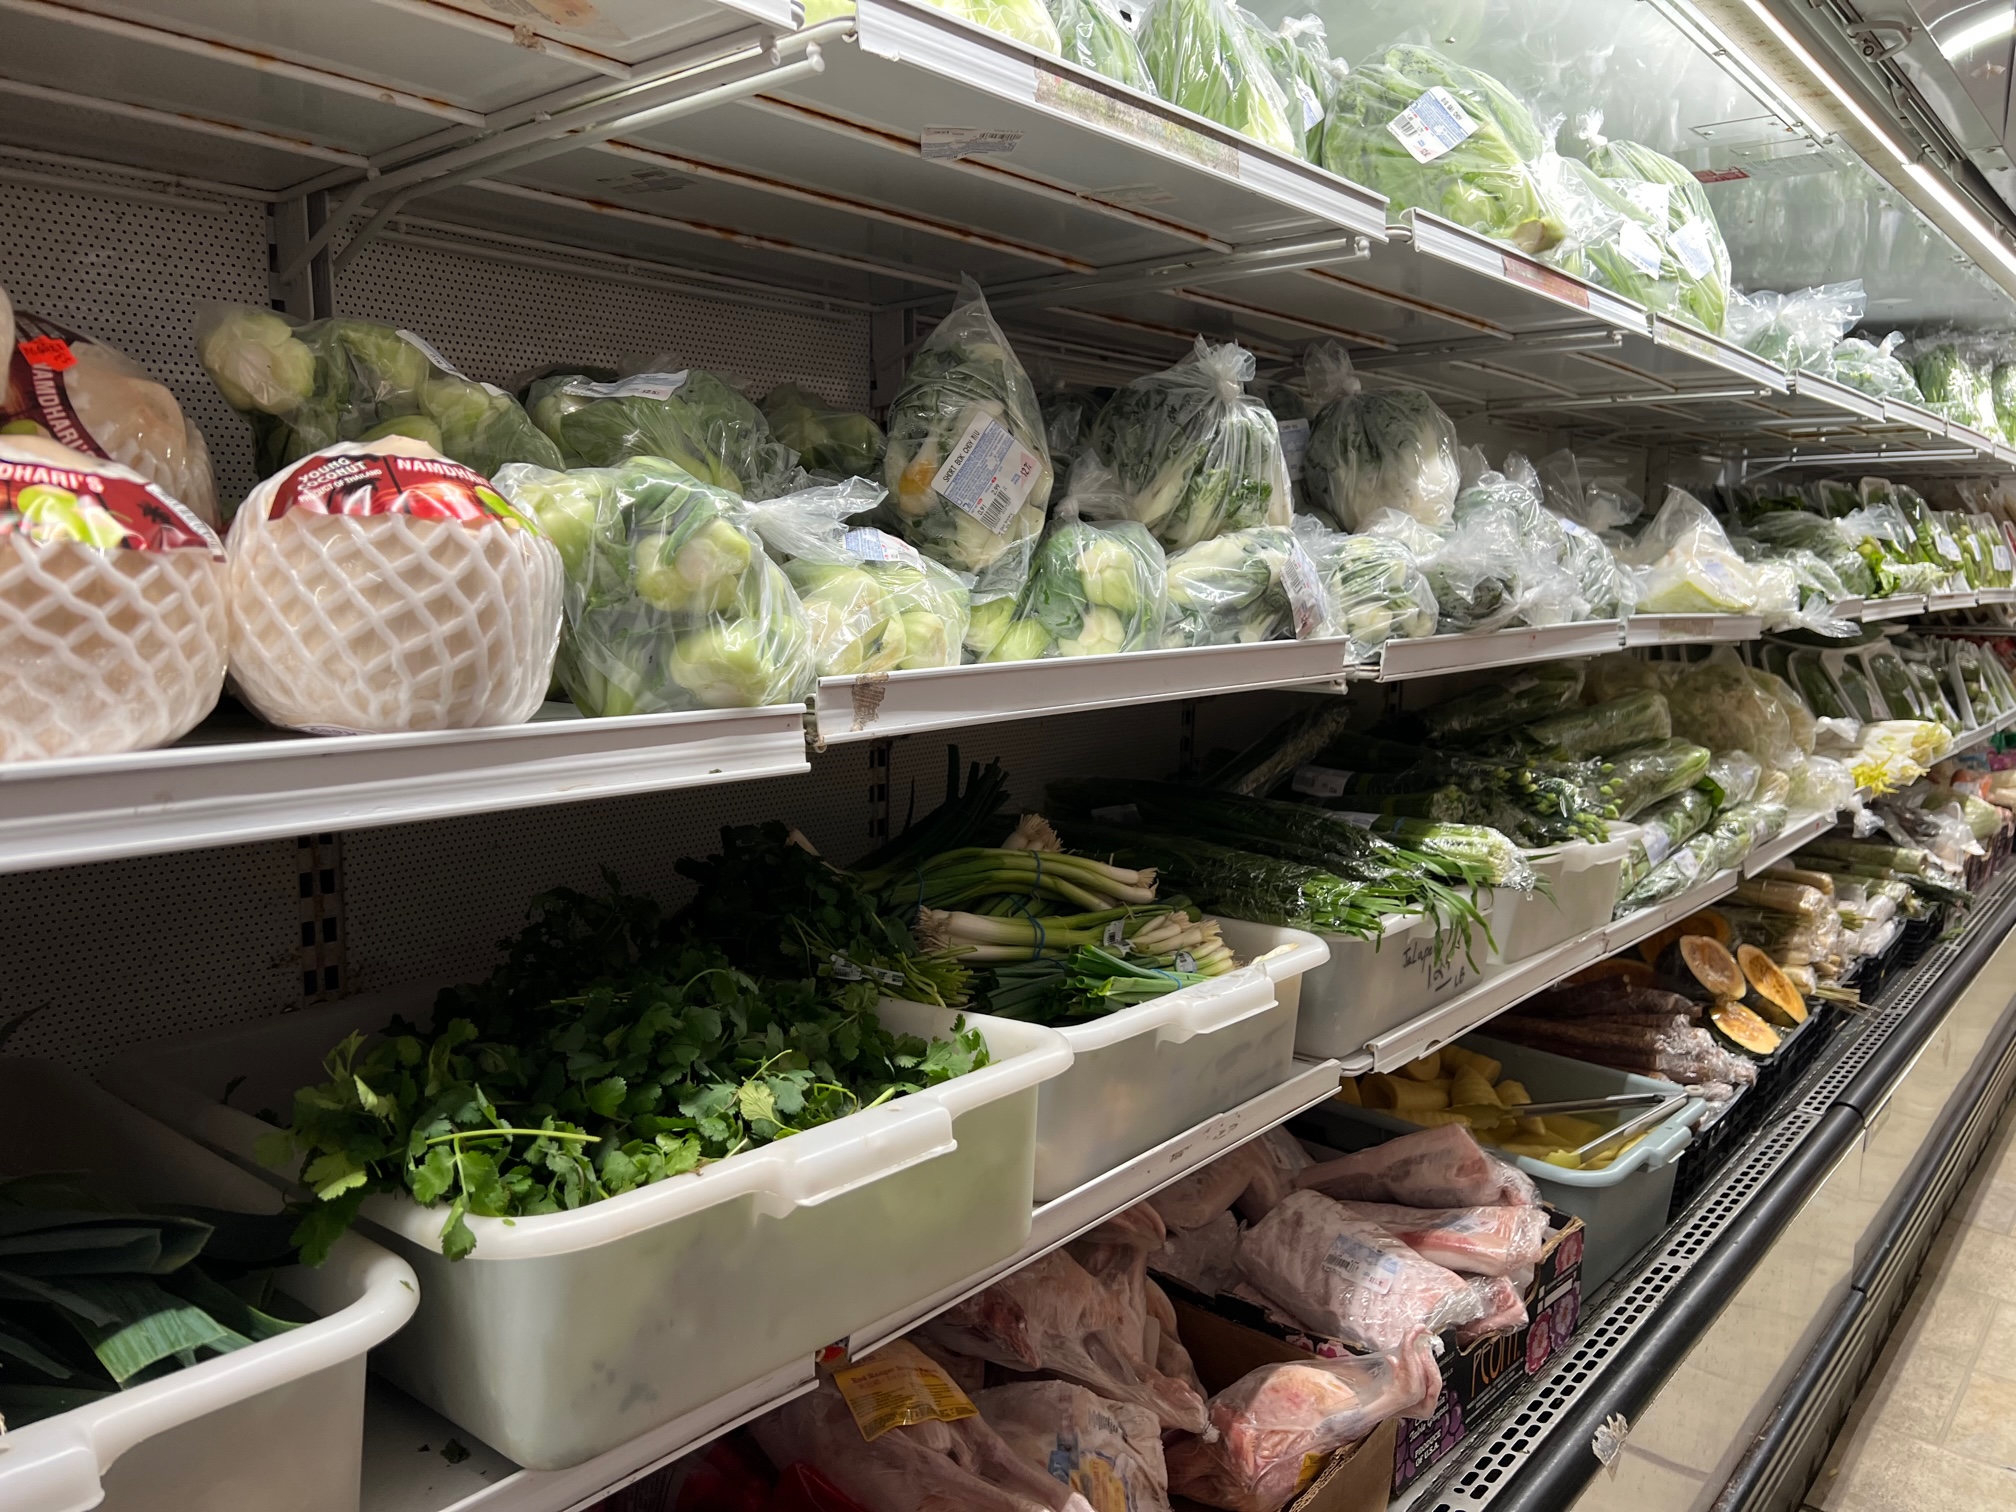 There are shelves with white plastic bins of produce in a cooler case at Far East Grocery. Photo by Alyssa Buckley.